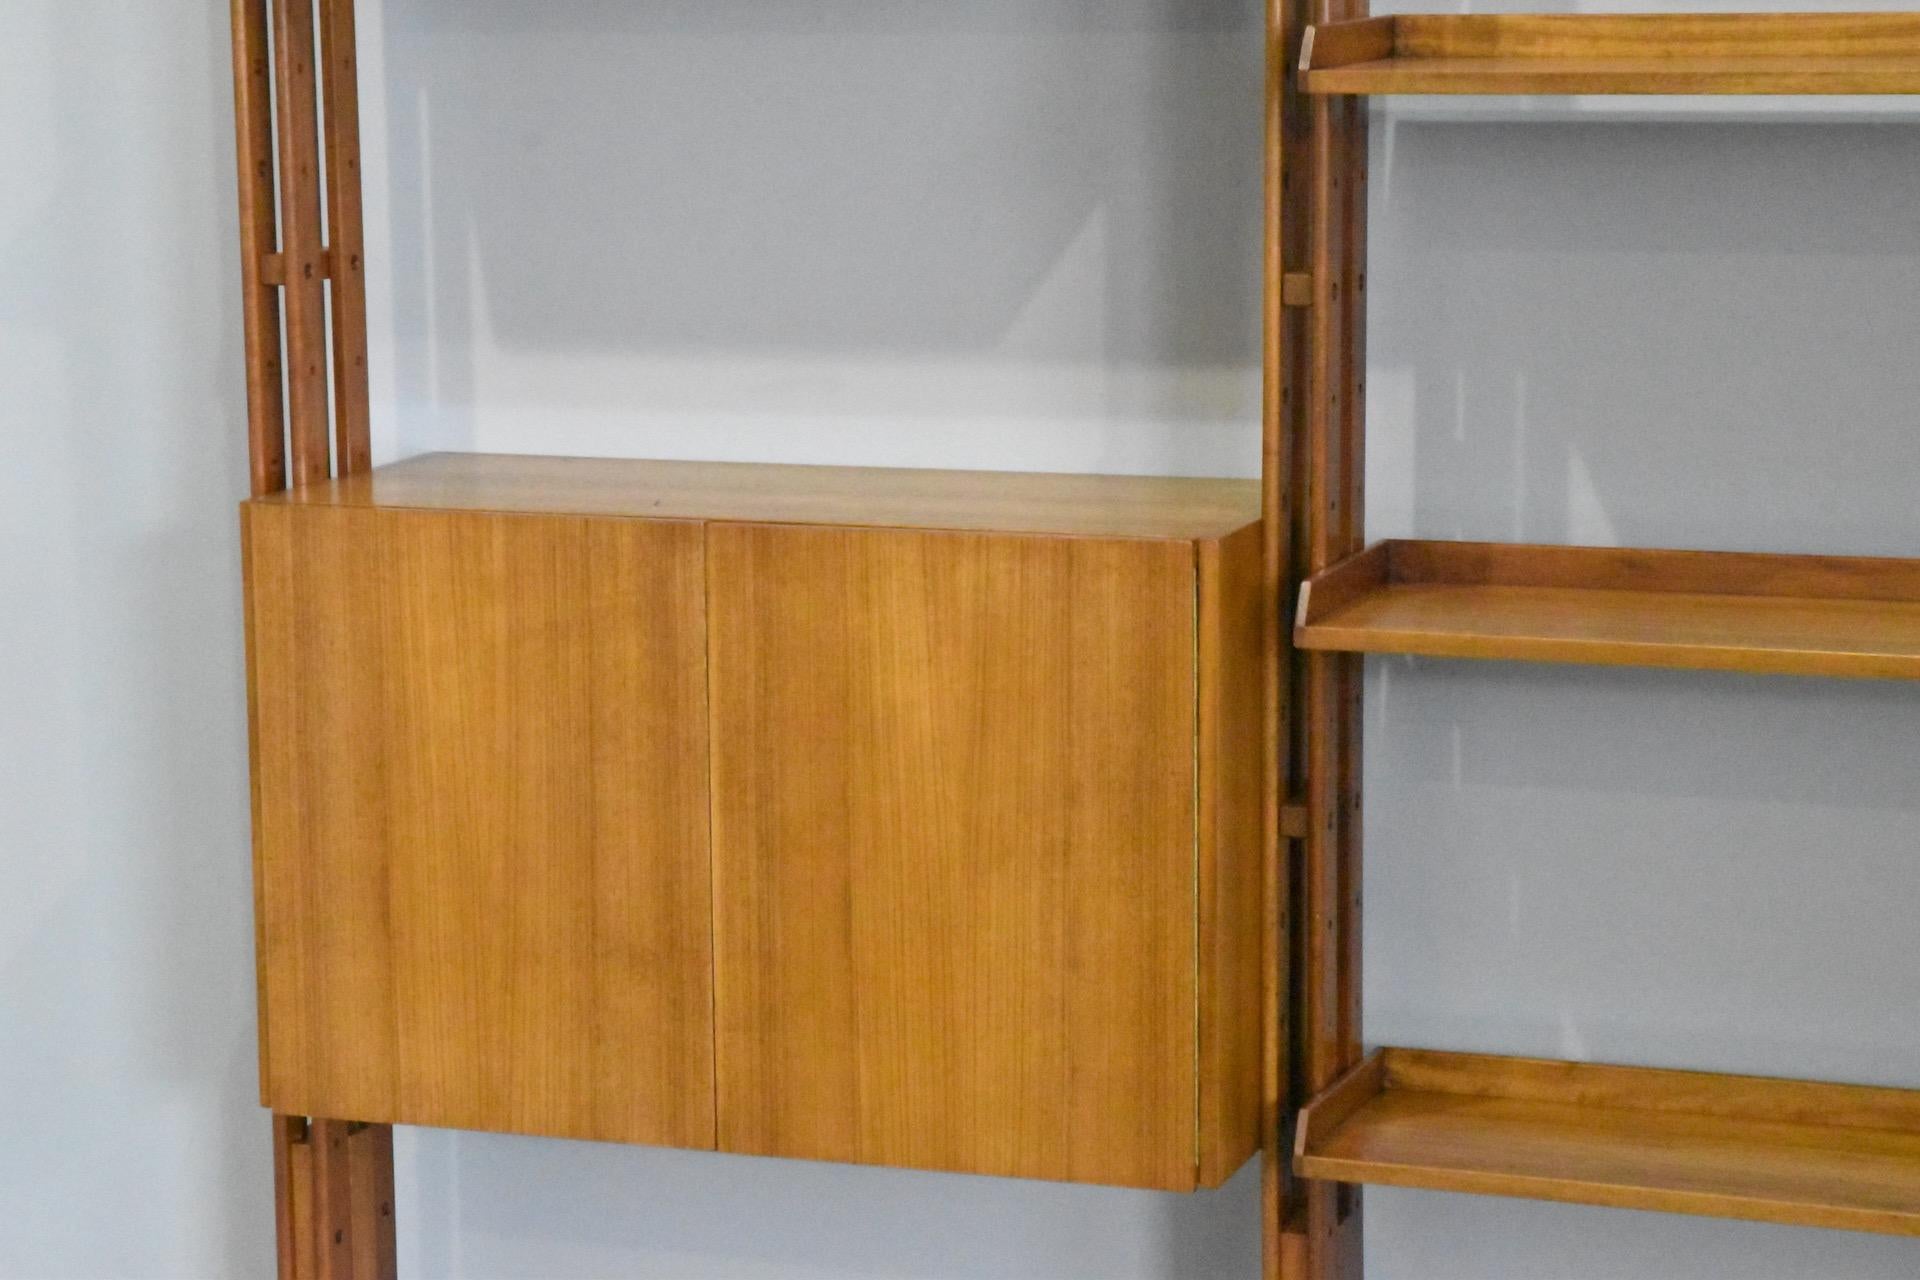 Teak library, Franco Ablini for Poggi, Italy, 1950. Elegant Franco Albini library or room divider. Shelves and units can be adjusted or put in different positions. The feet are in lacquered aluminum. The height is adjustable from 310 to 335 cm.